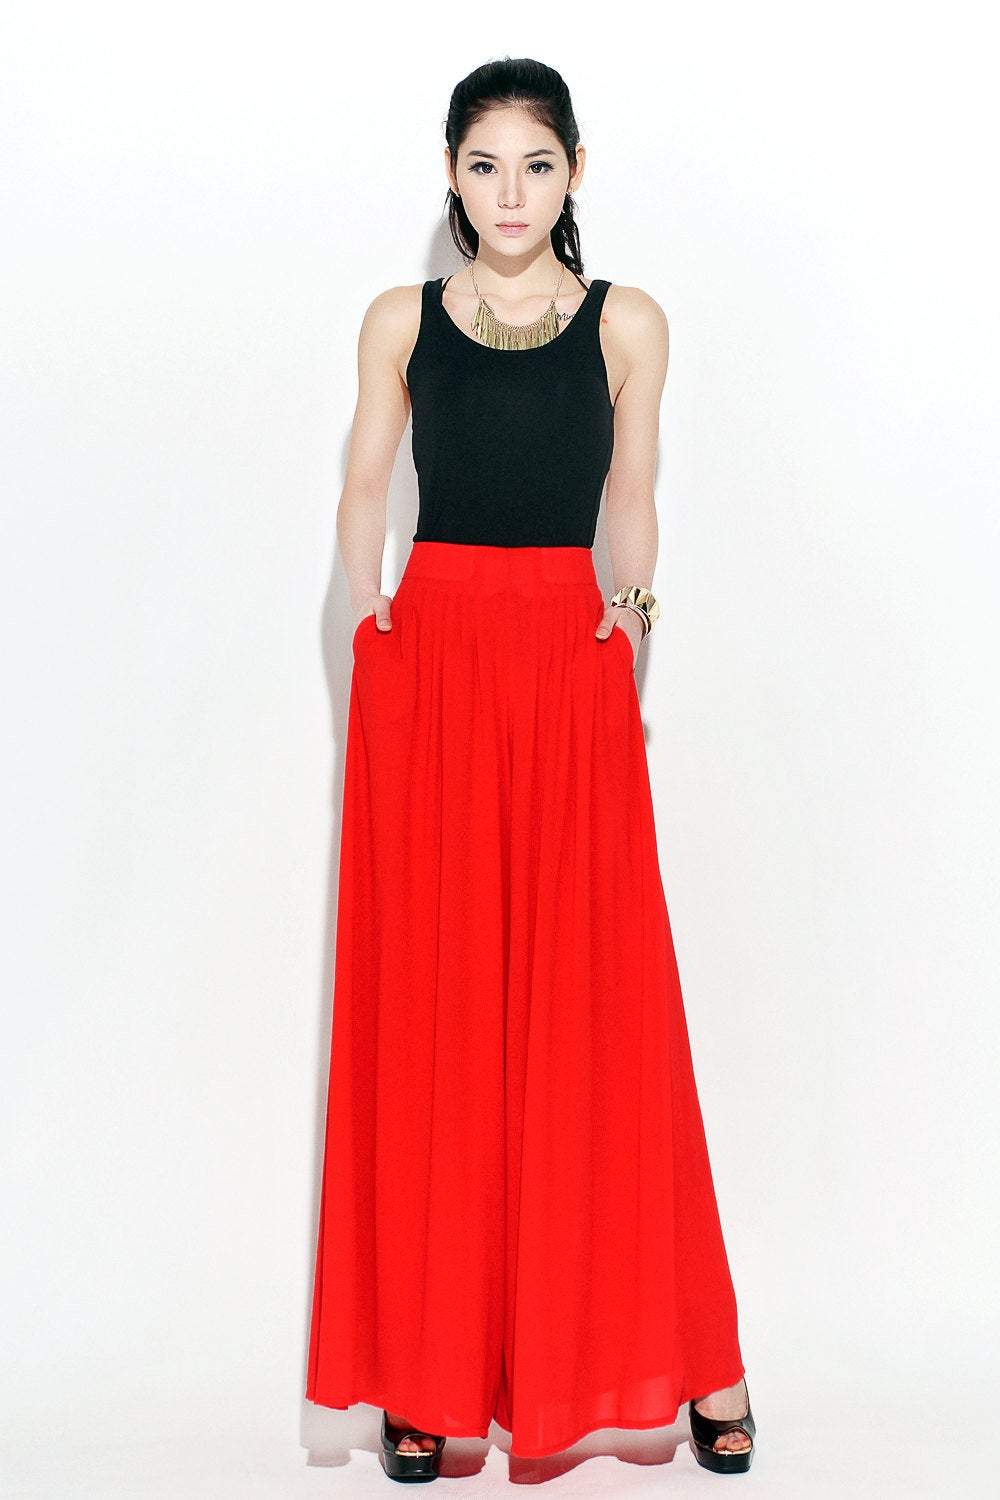 How to Style Red Wide Leg Pants: 15 Amazing Outfit Ideas - FMag.com